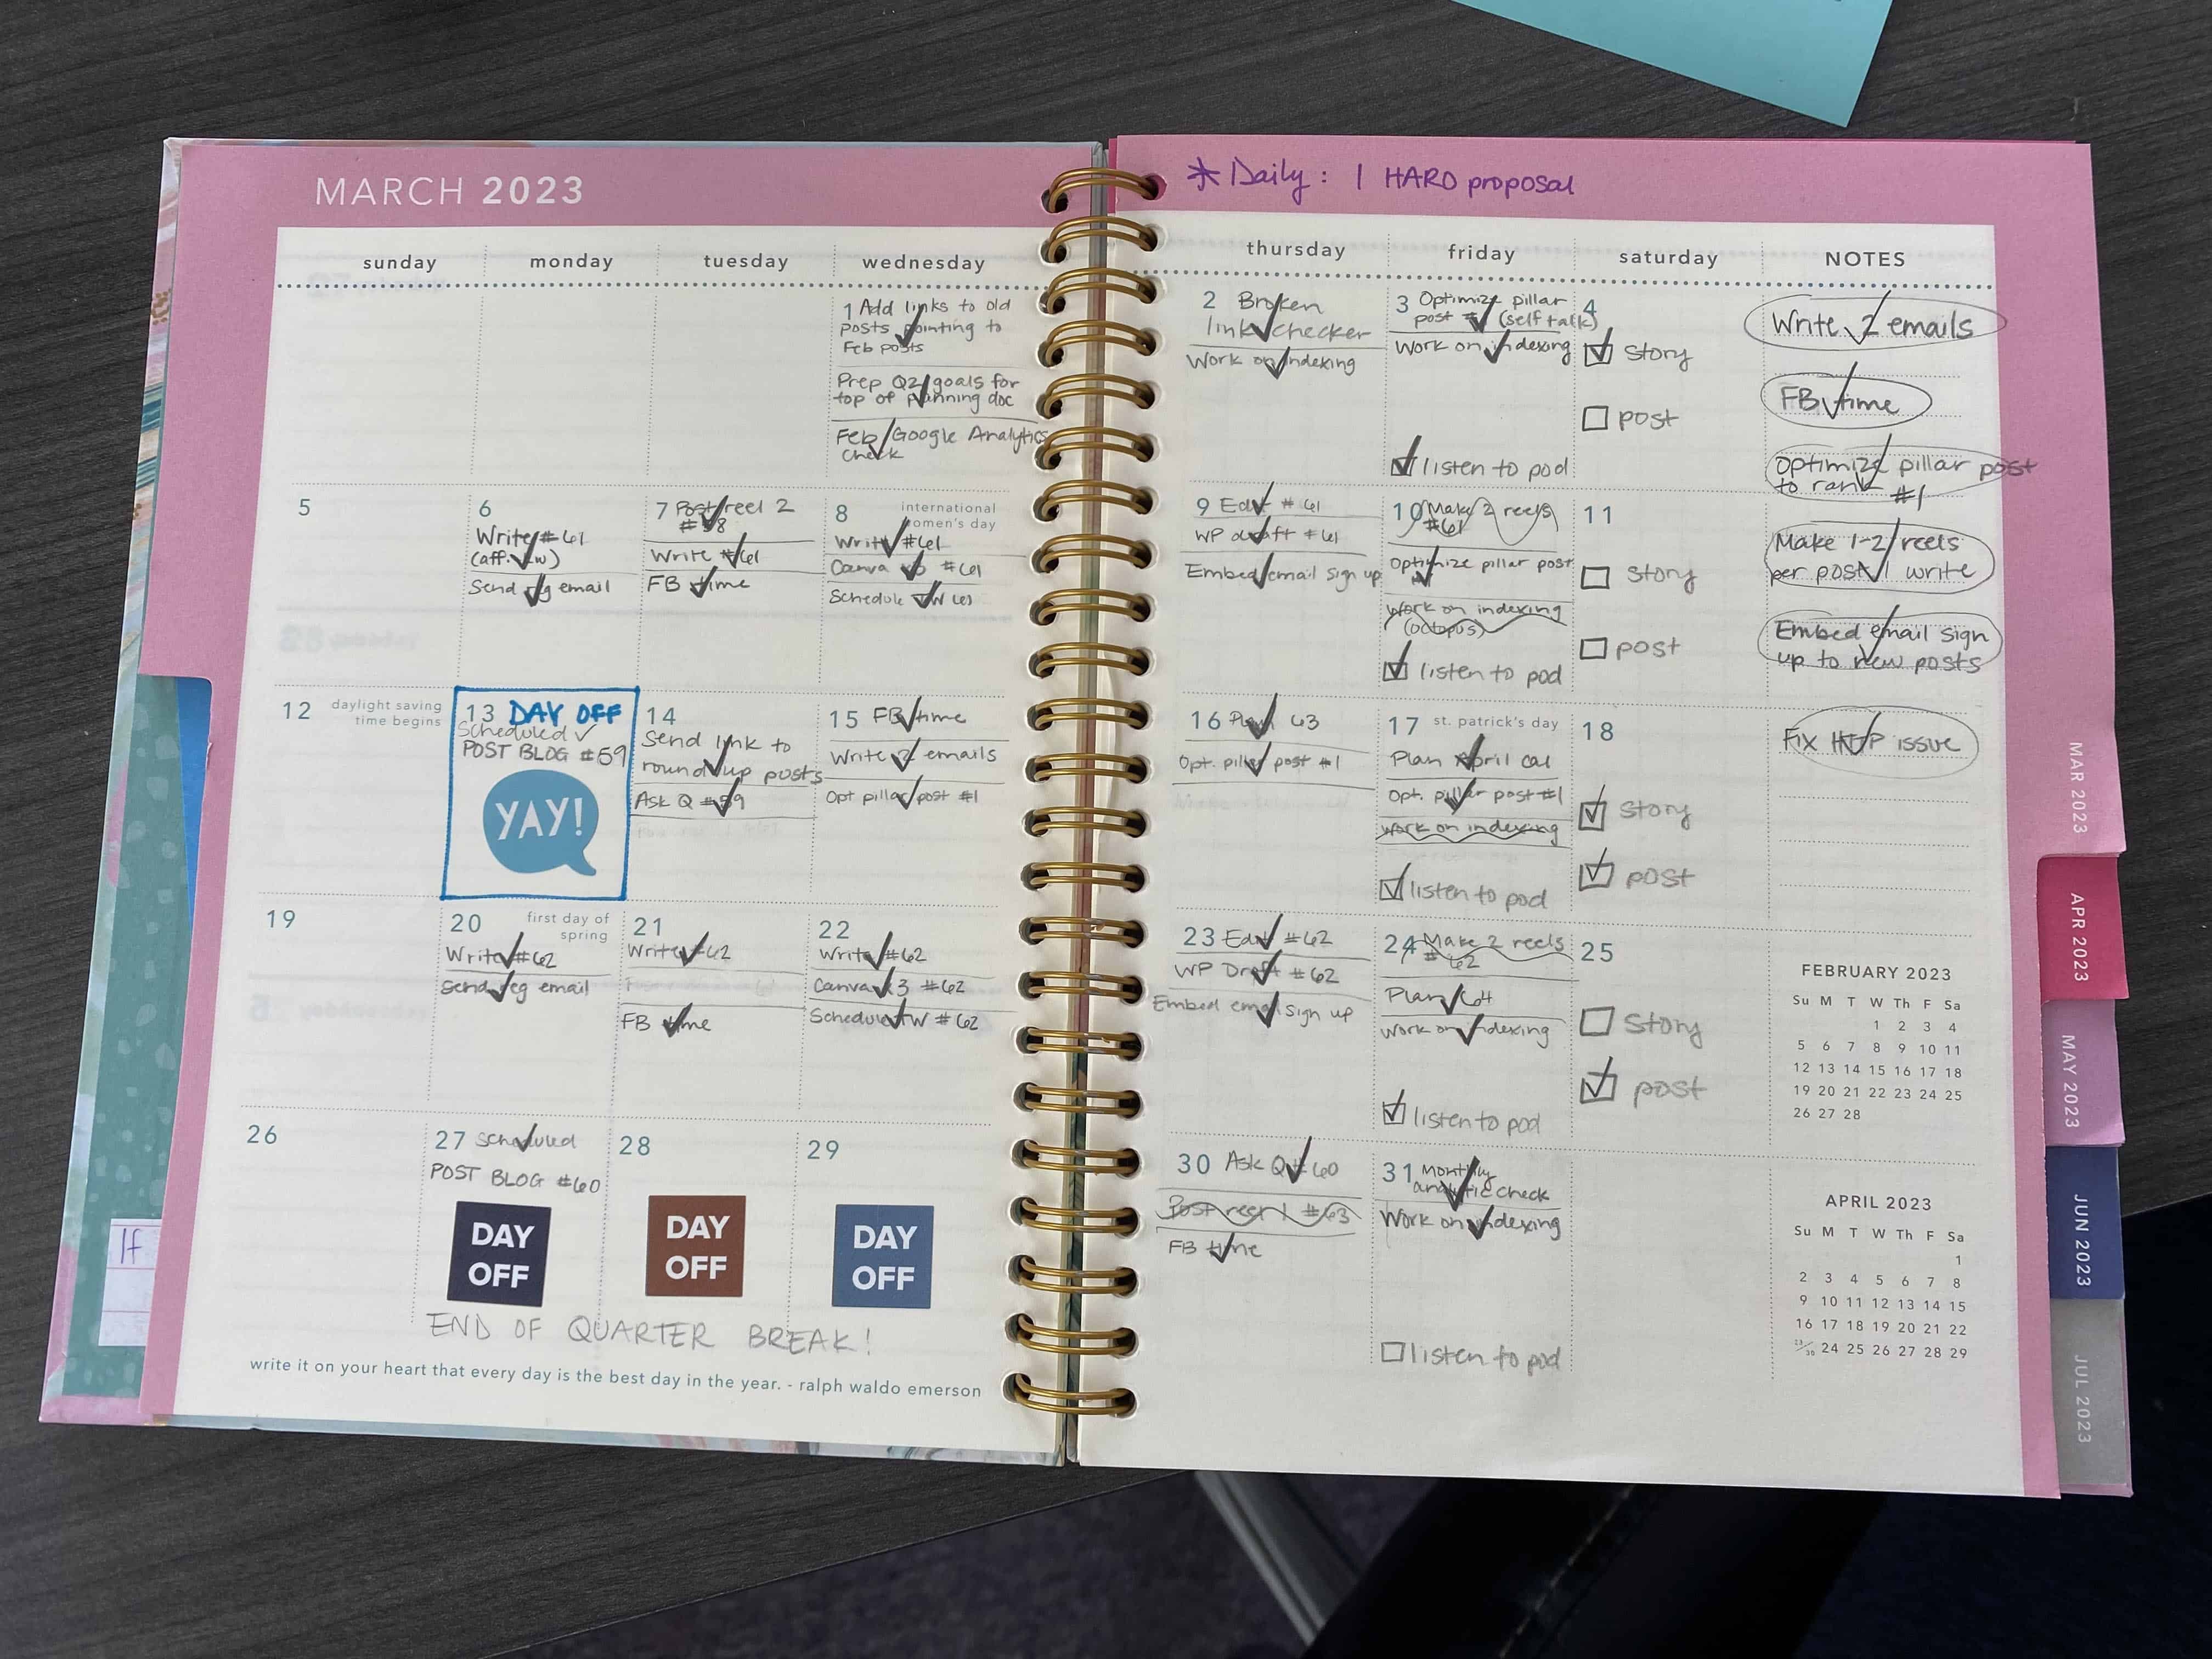 Skye Sauchelli's calendar planner with daily tasks scheduled to help accomplish a goal